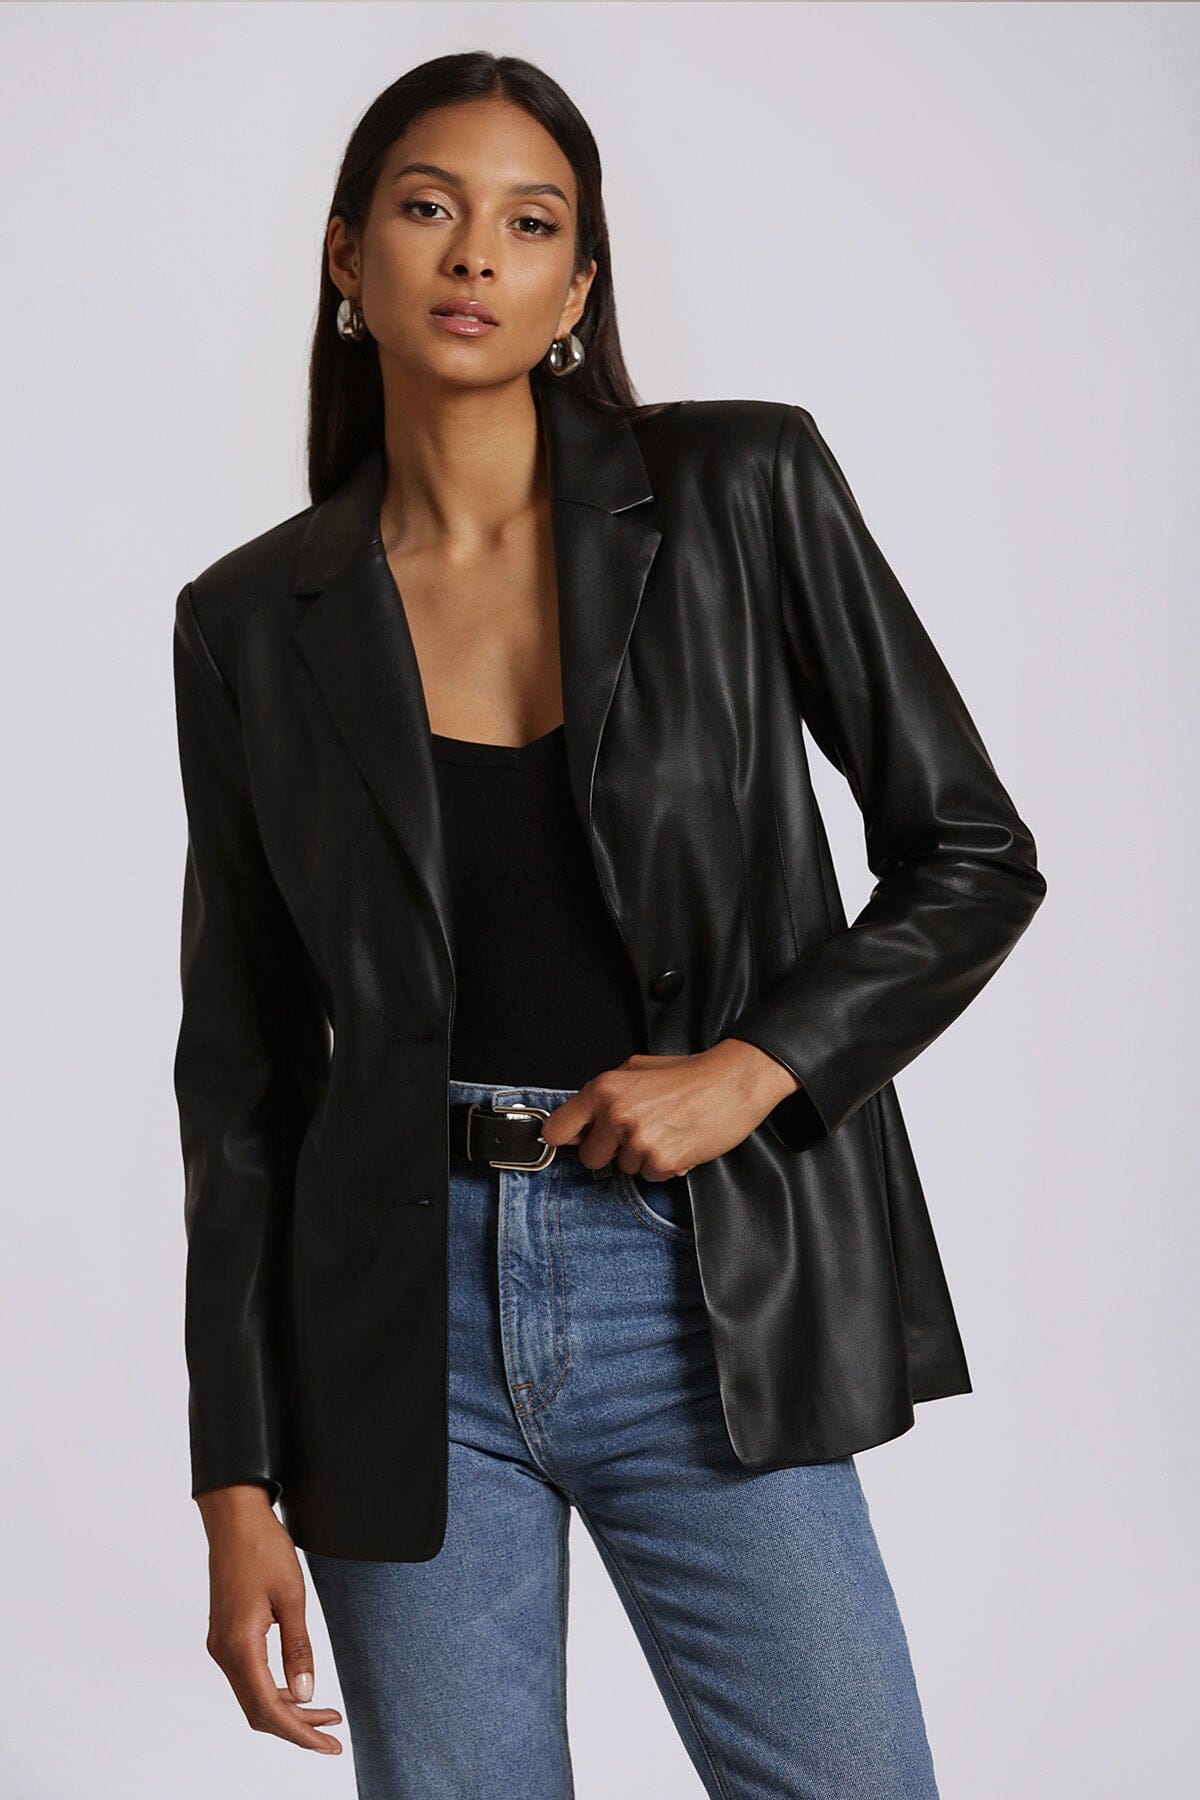 faux ever leather sculpted blazer jacket coat black - figure flattering office to date night blazers coats jackets for women